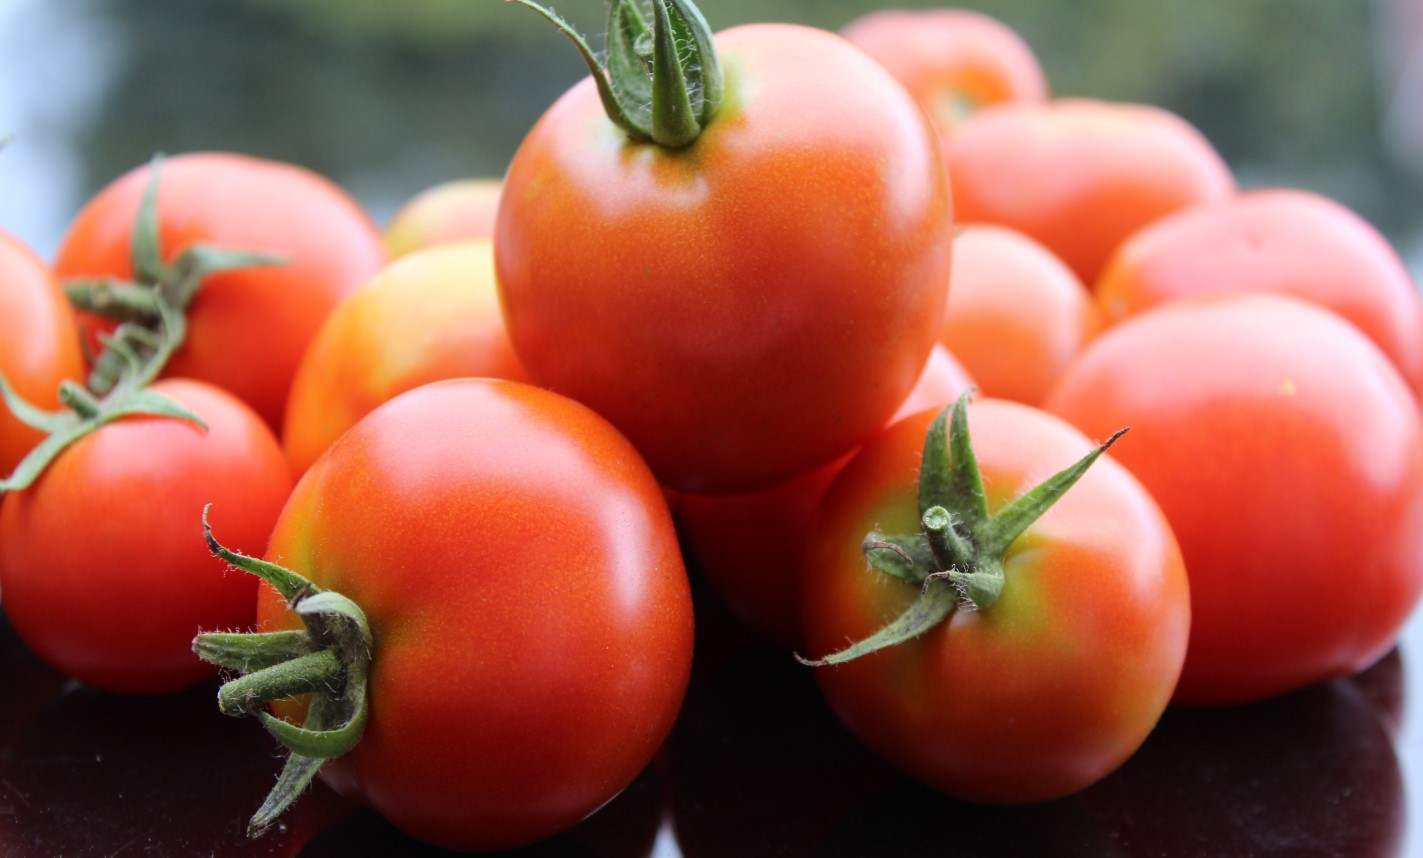  Tomato Nutrition Data and Health Benefits 